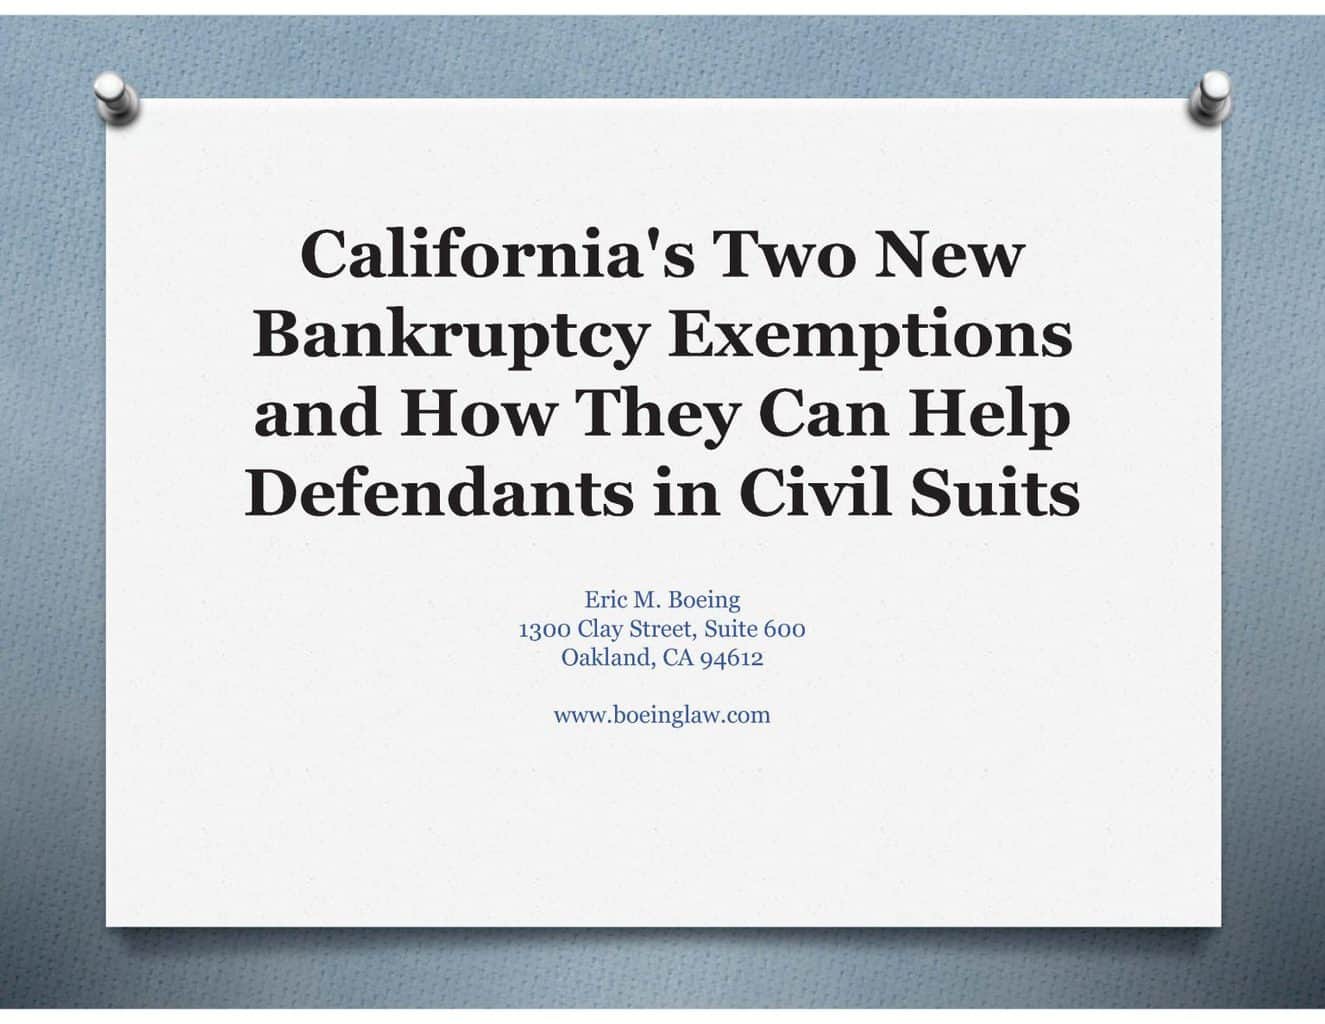 [8/19/21 Zoom Meeting] California’s Two New Bankruptcy Exemptions and